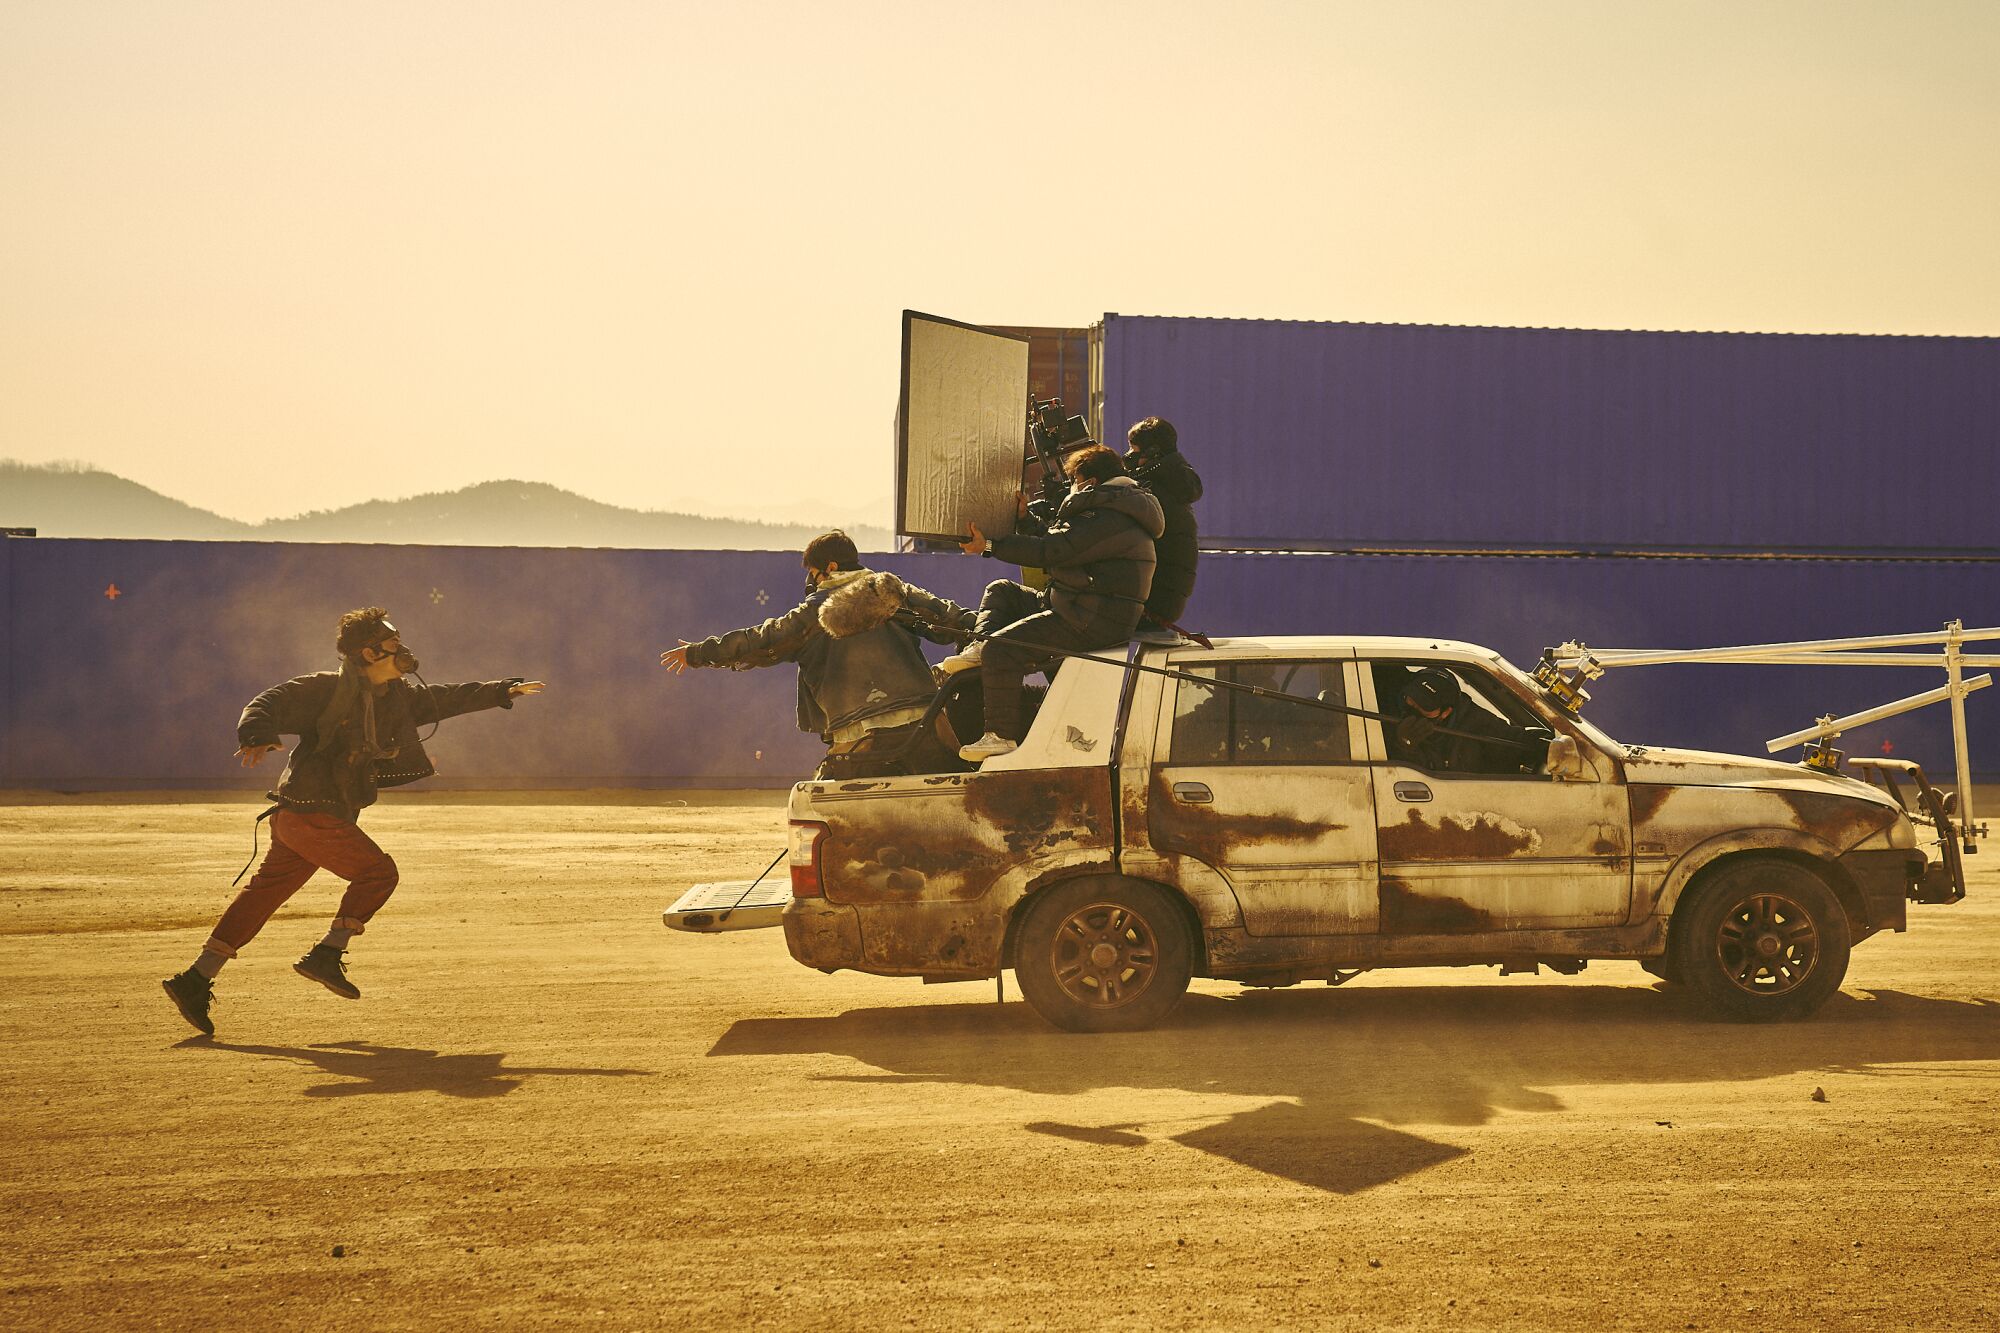 A man on a vehicle reaches his arm out to another man chasing the vehicle in foot 